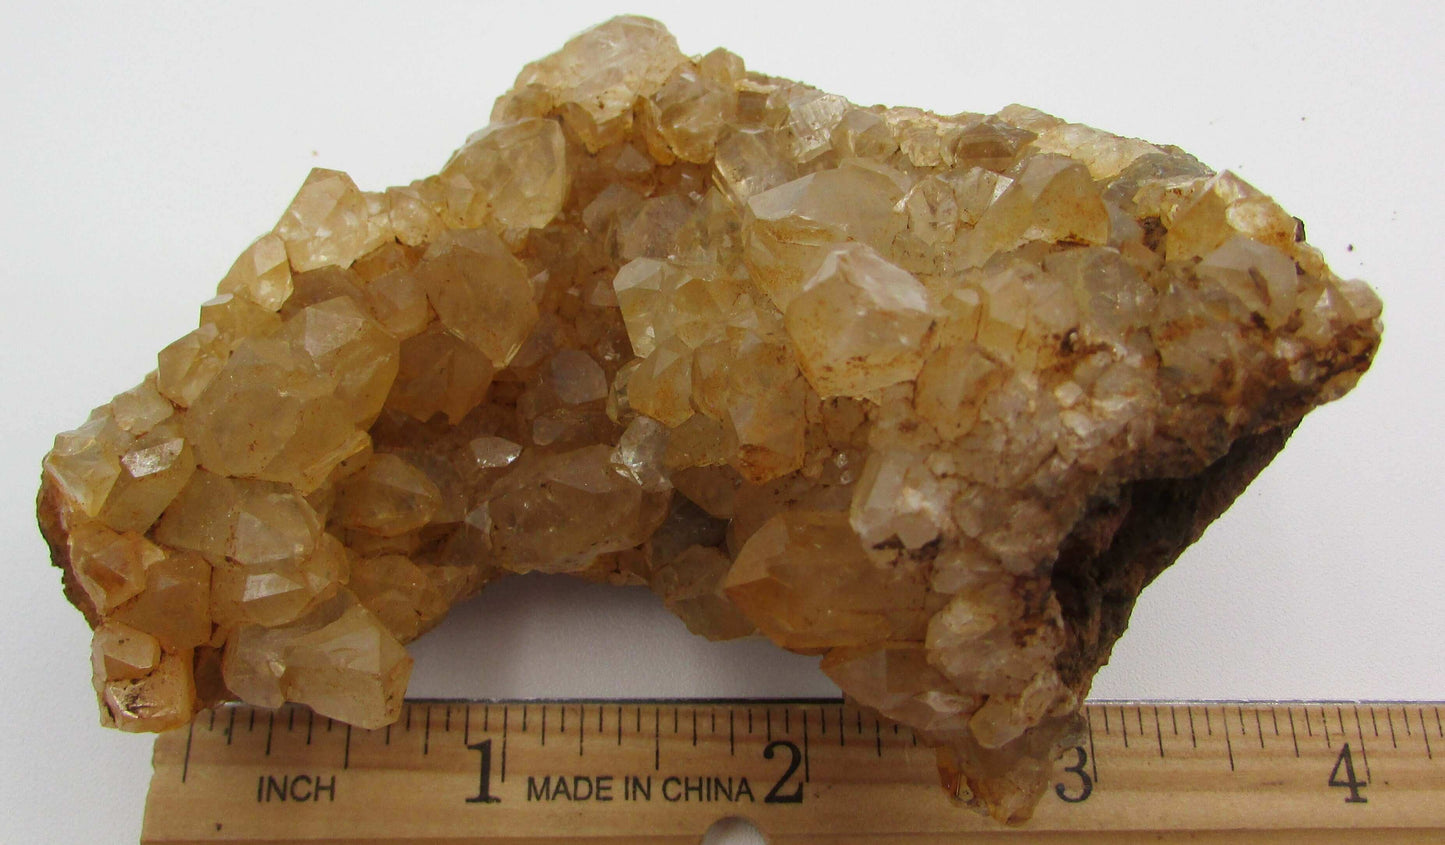 Golden Healer Crystal Cluster from Zambia